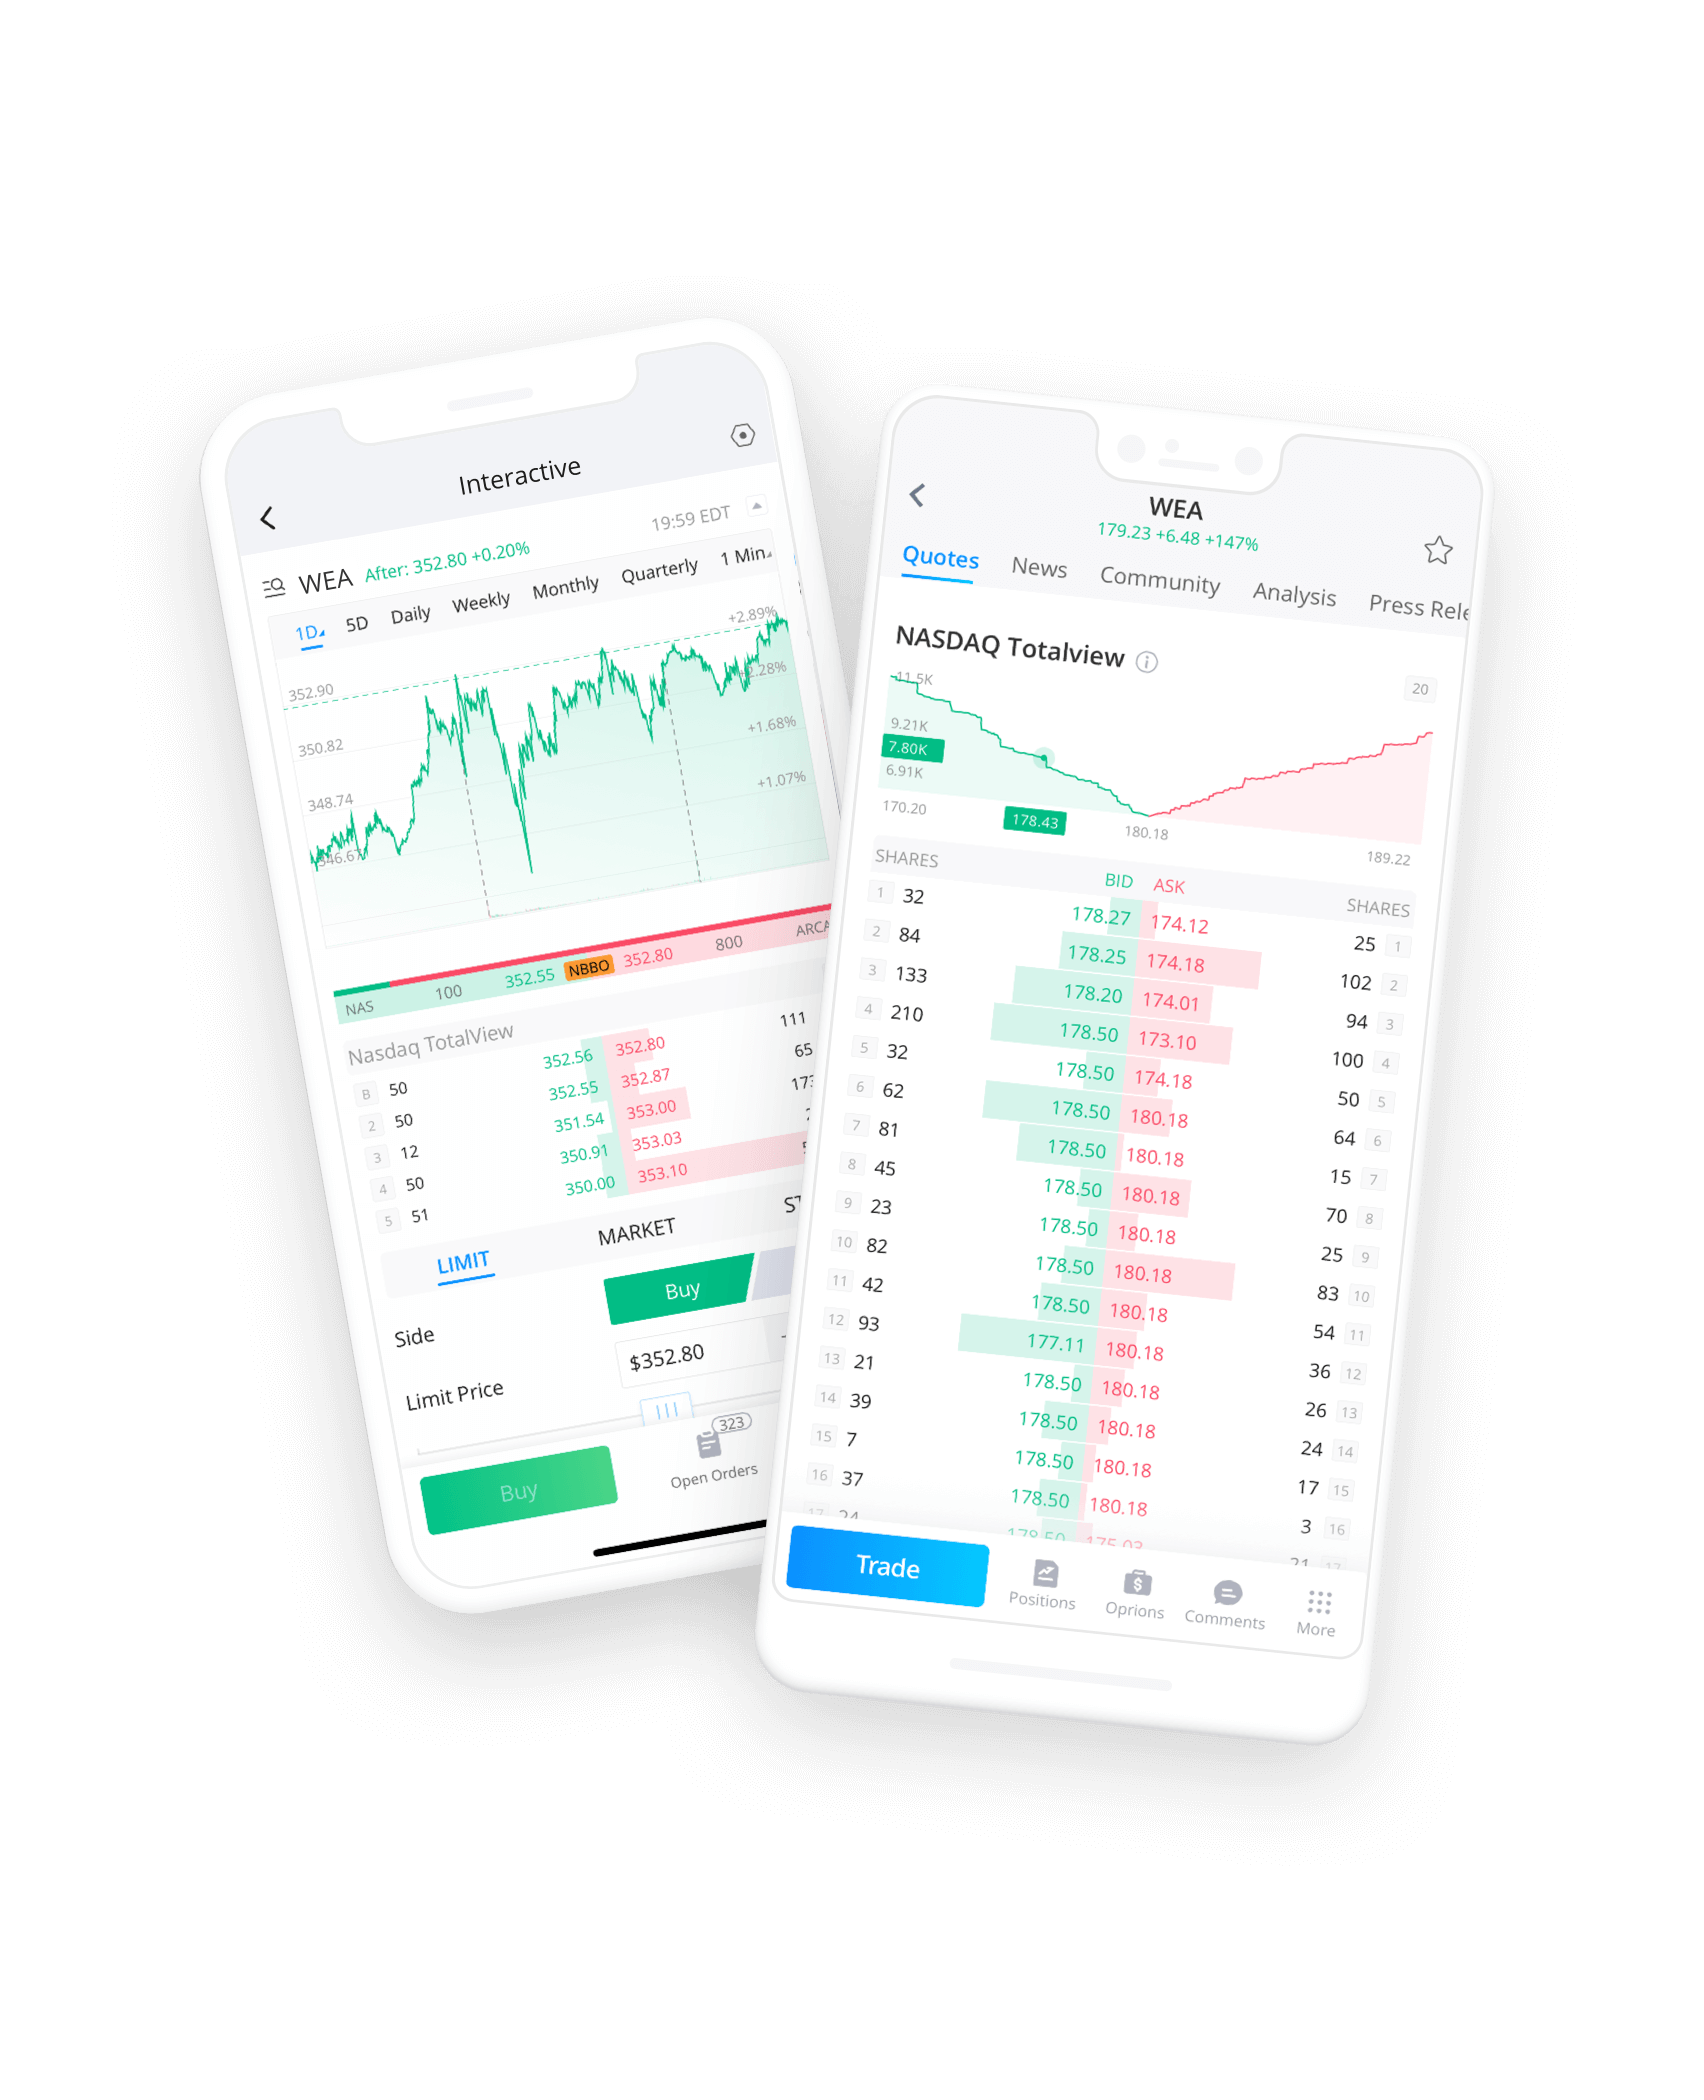 Webull - Download and Start Trading Stocks for Free